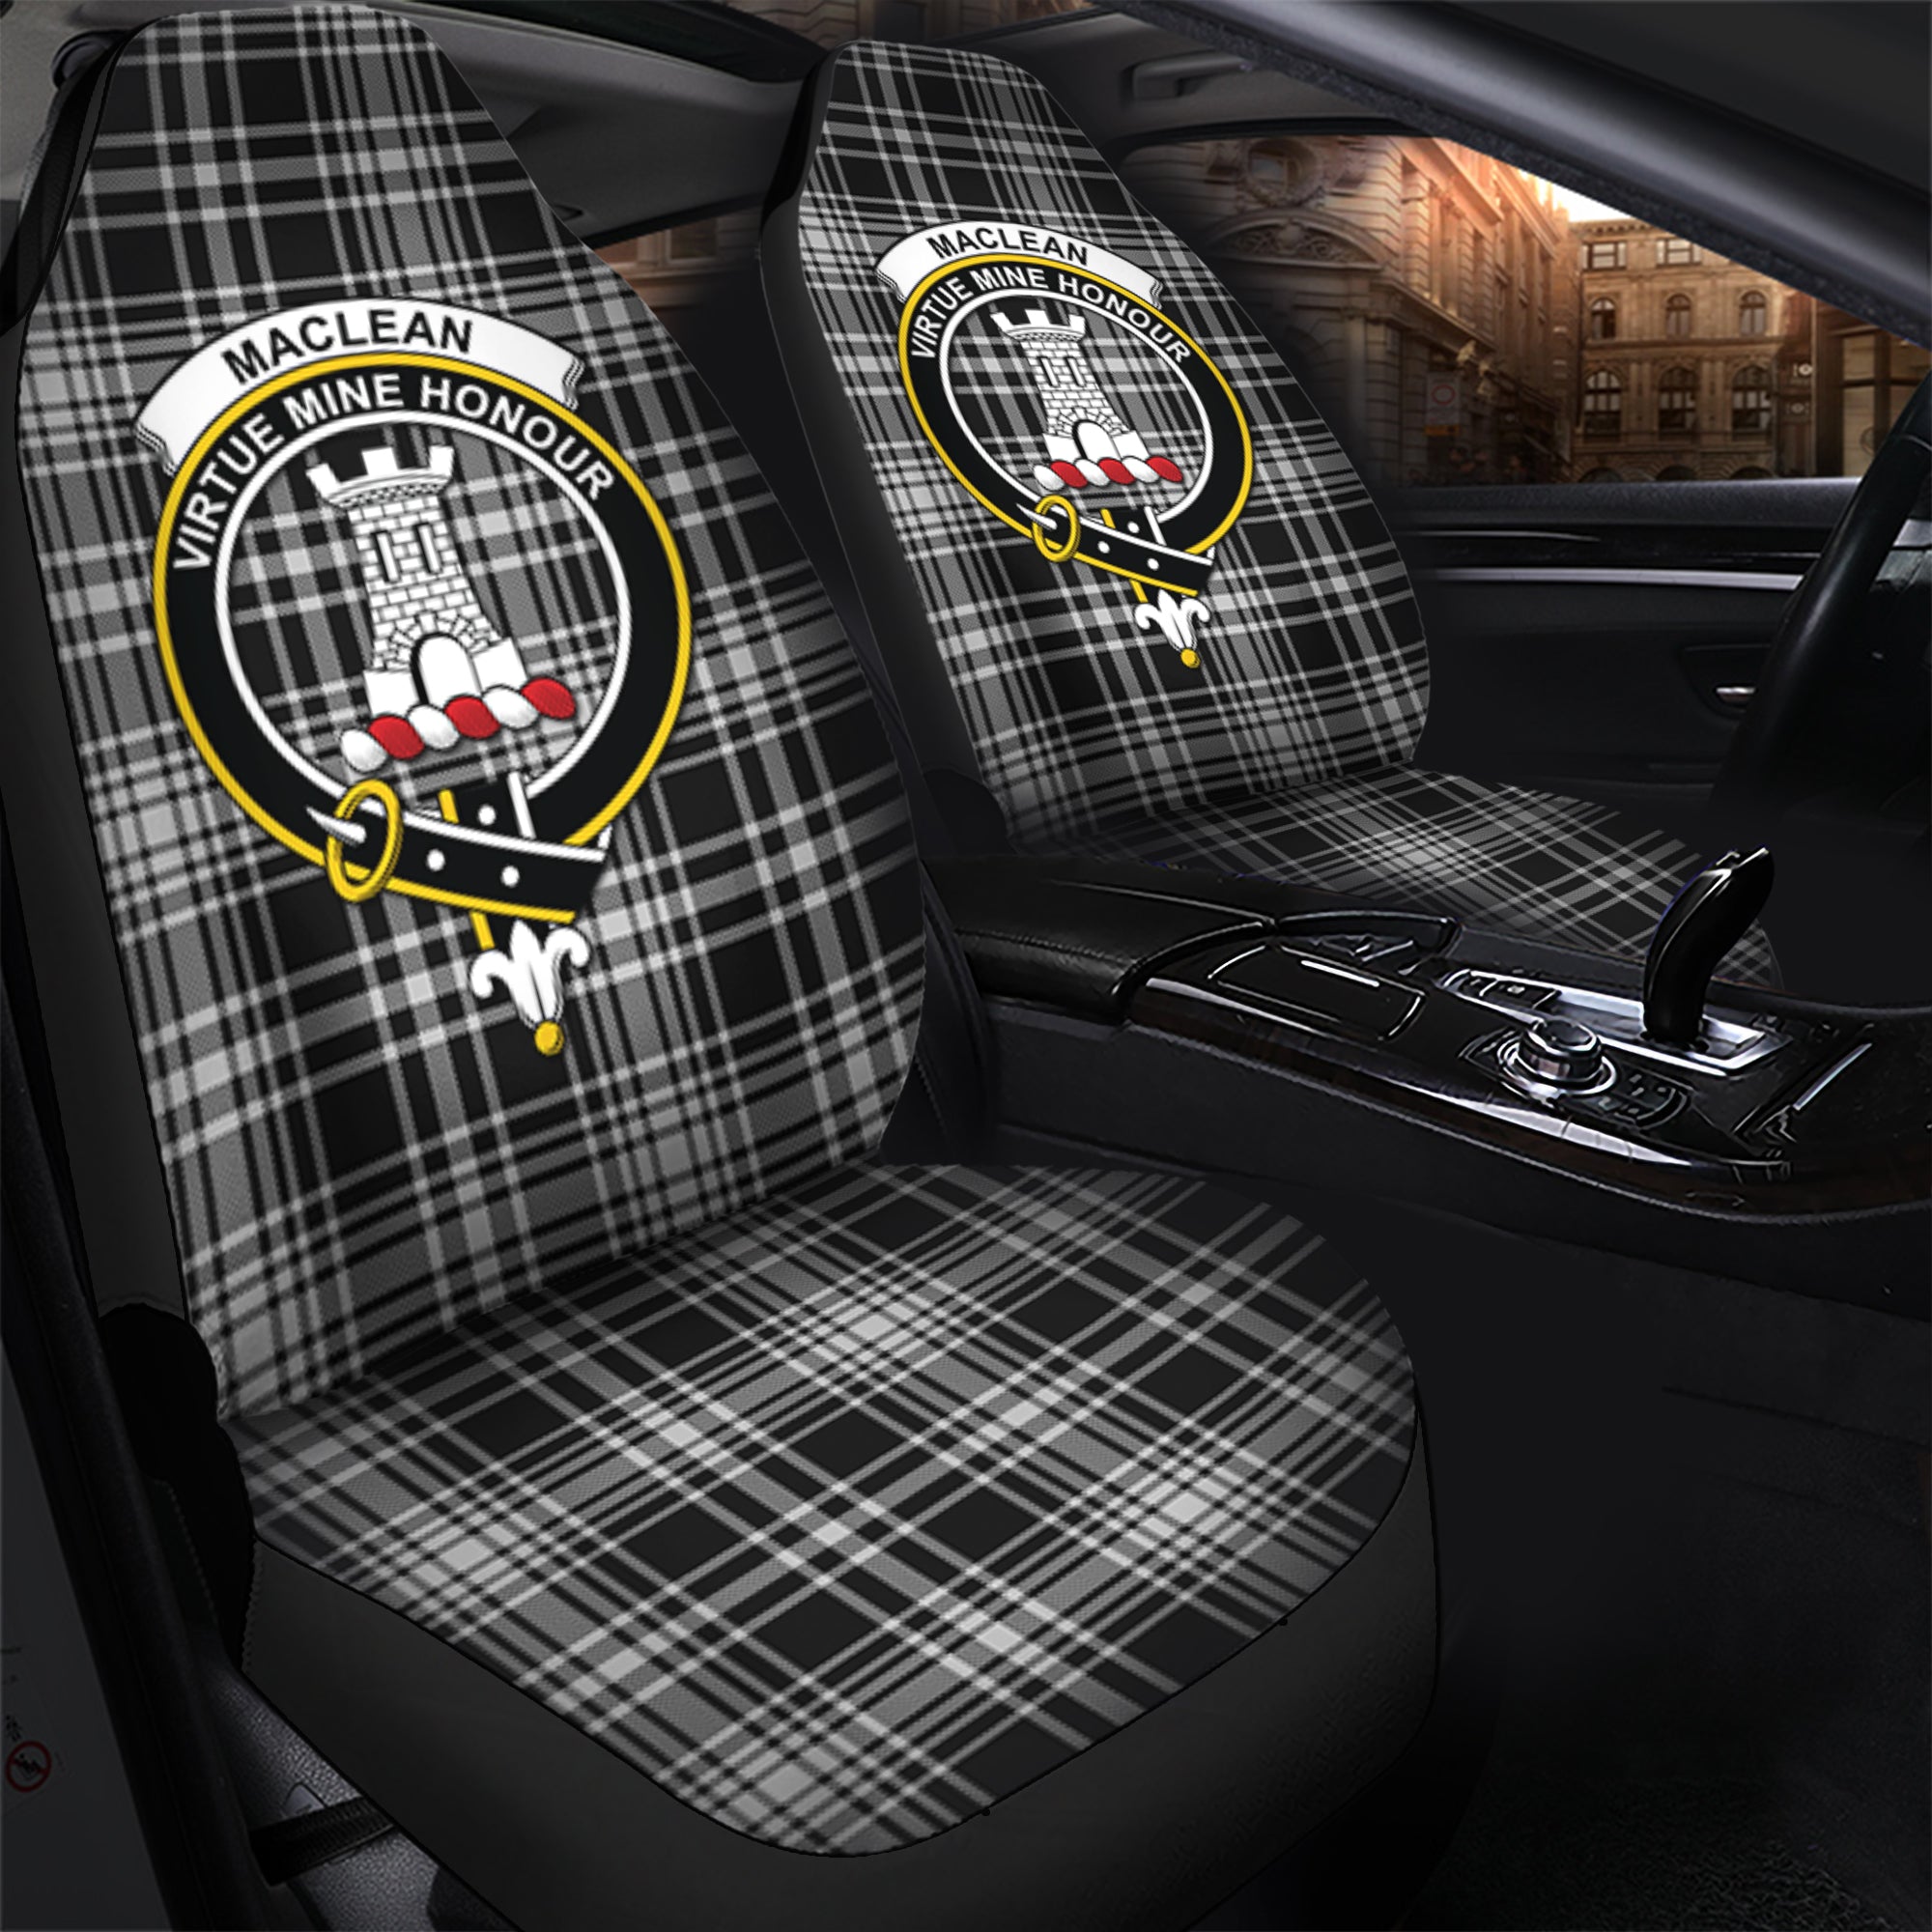 MacLean Black and White Clan Tartan Car Seat Cover, Family Crest Tartan Seat Cover TS23